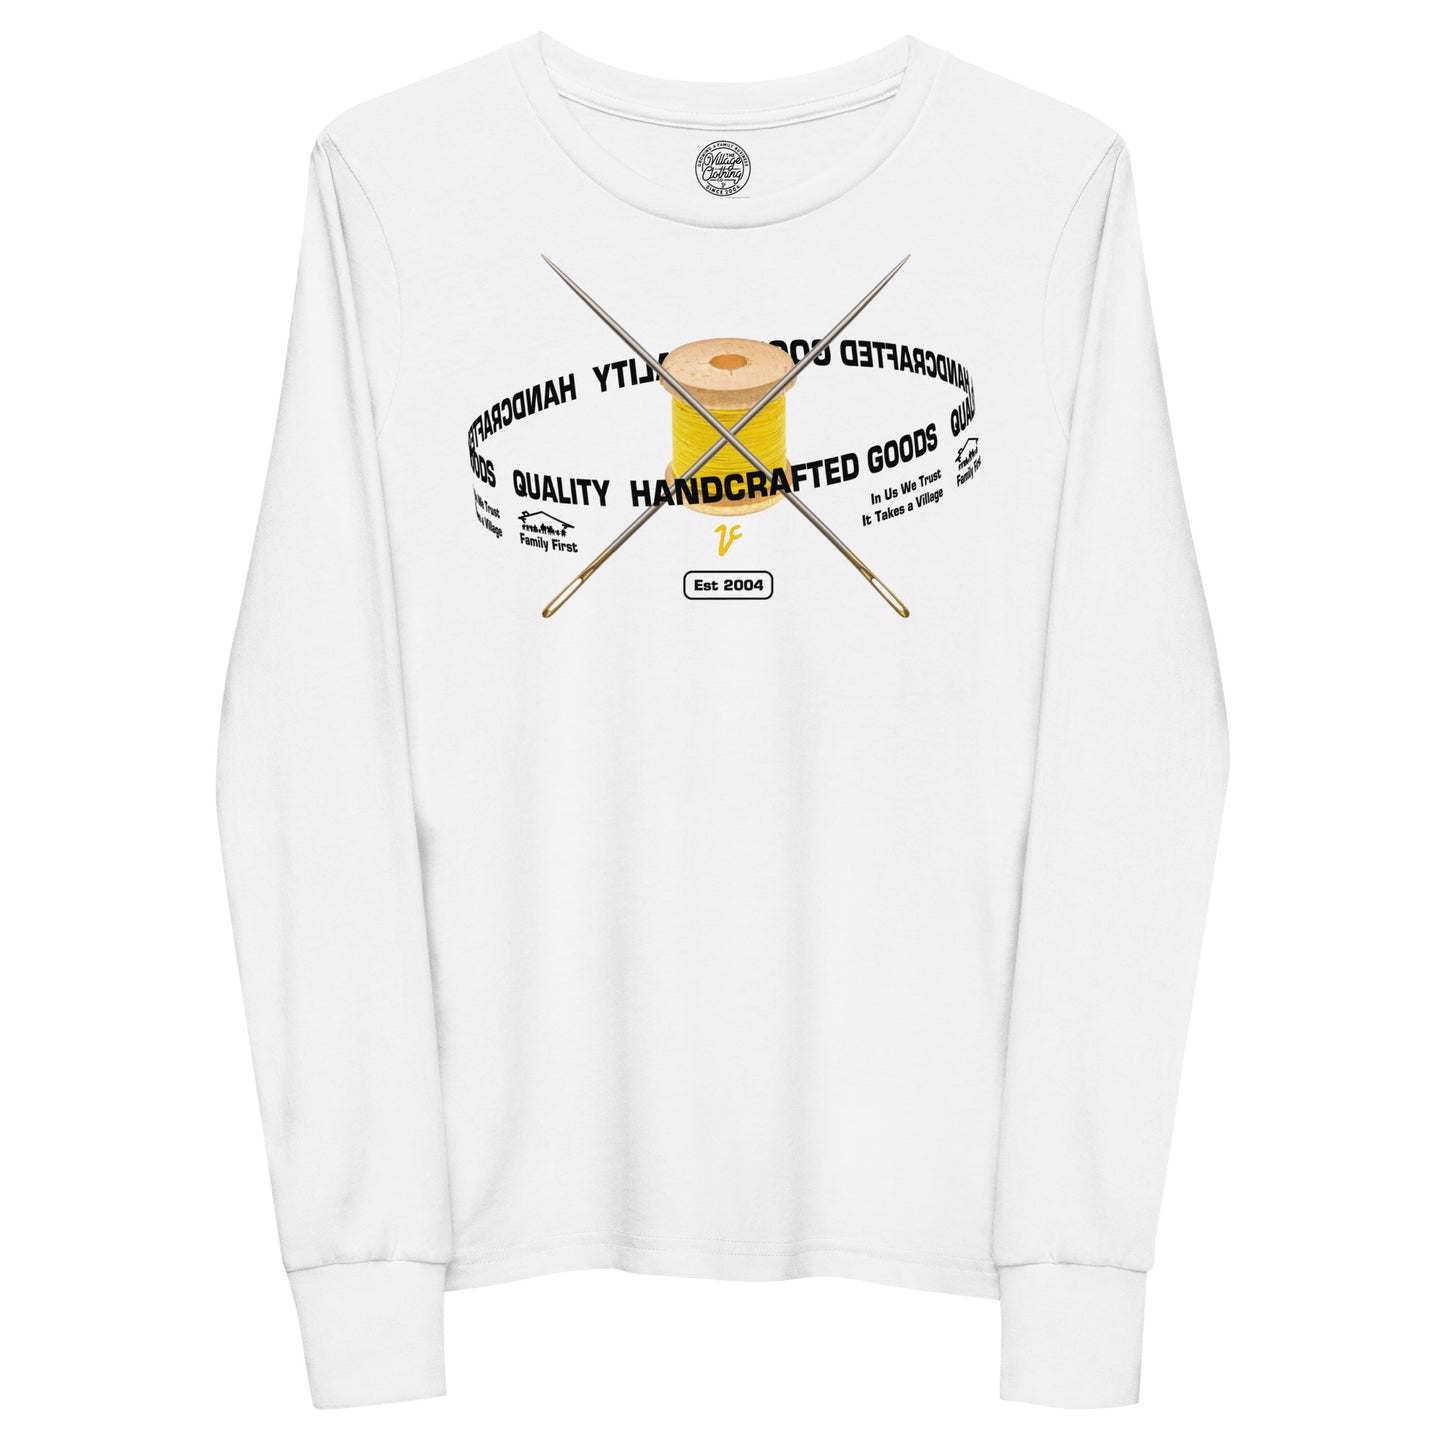 The Future - VC Youth Long Sleeve Tee